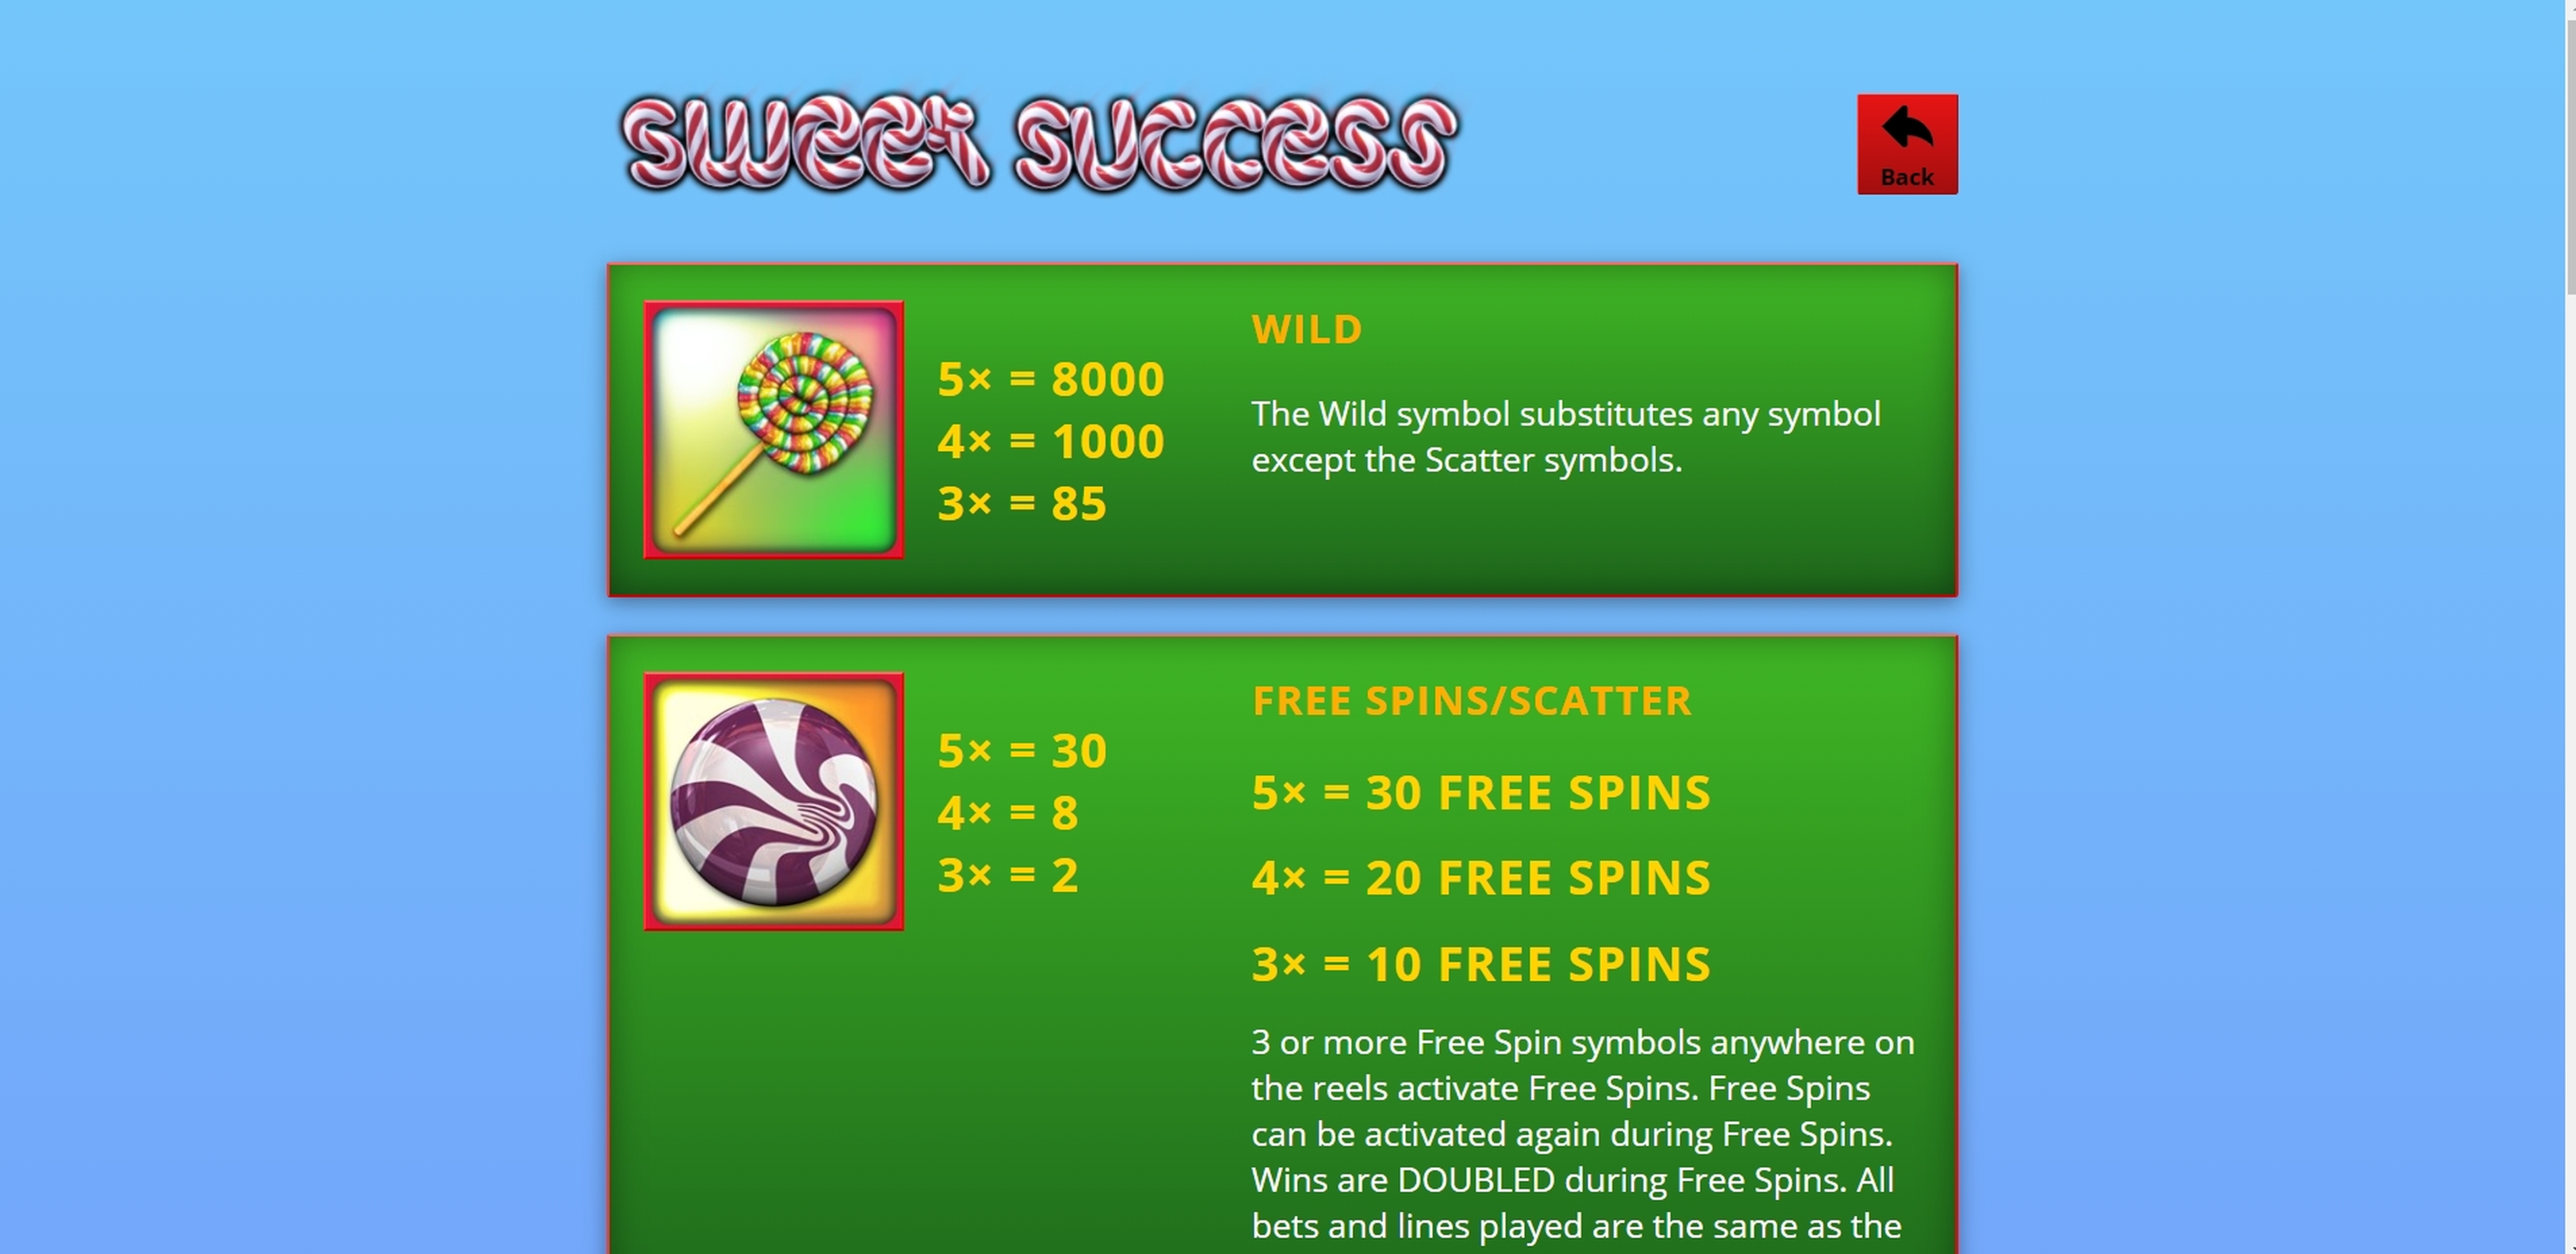 Info of Sweet Success Slot Game by saucify